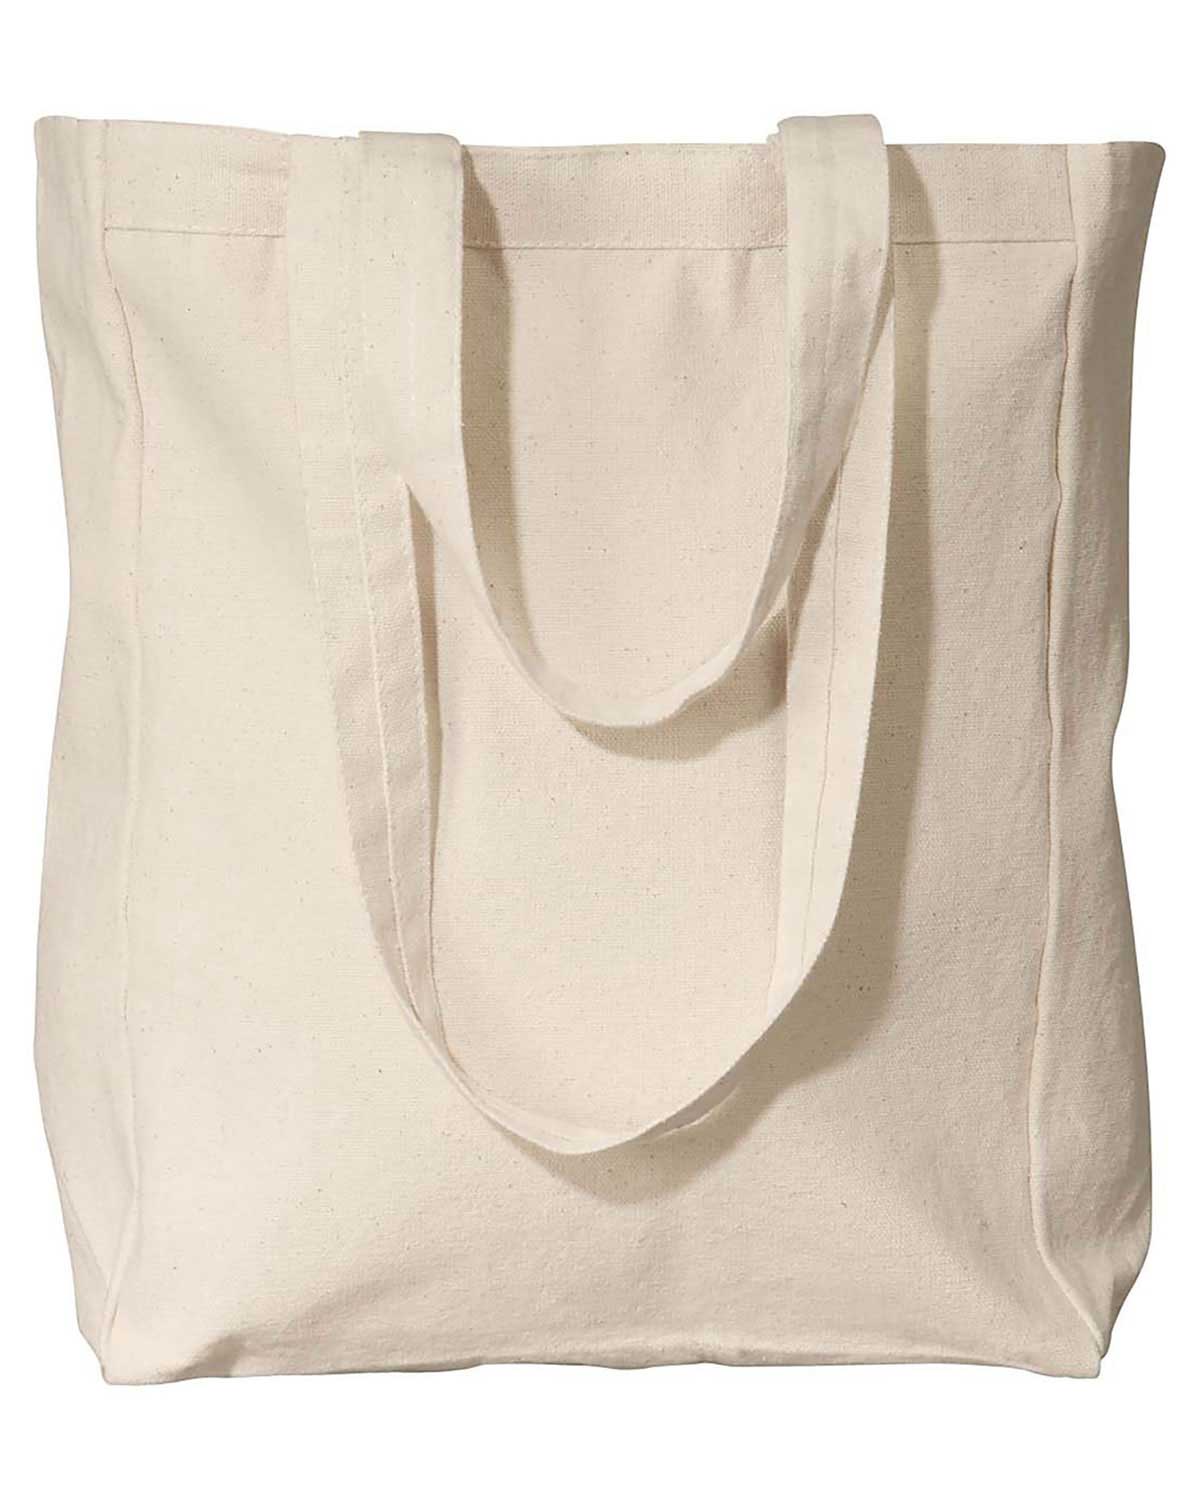 UltraClub 8861 Unisex Tote with Gusset at Apparelstation